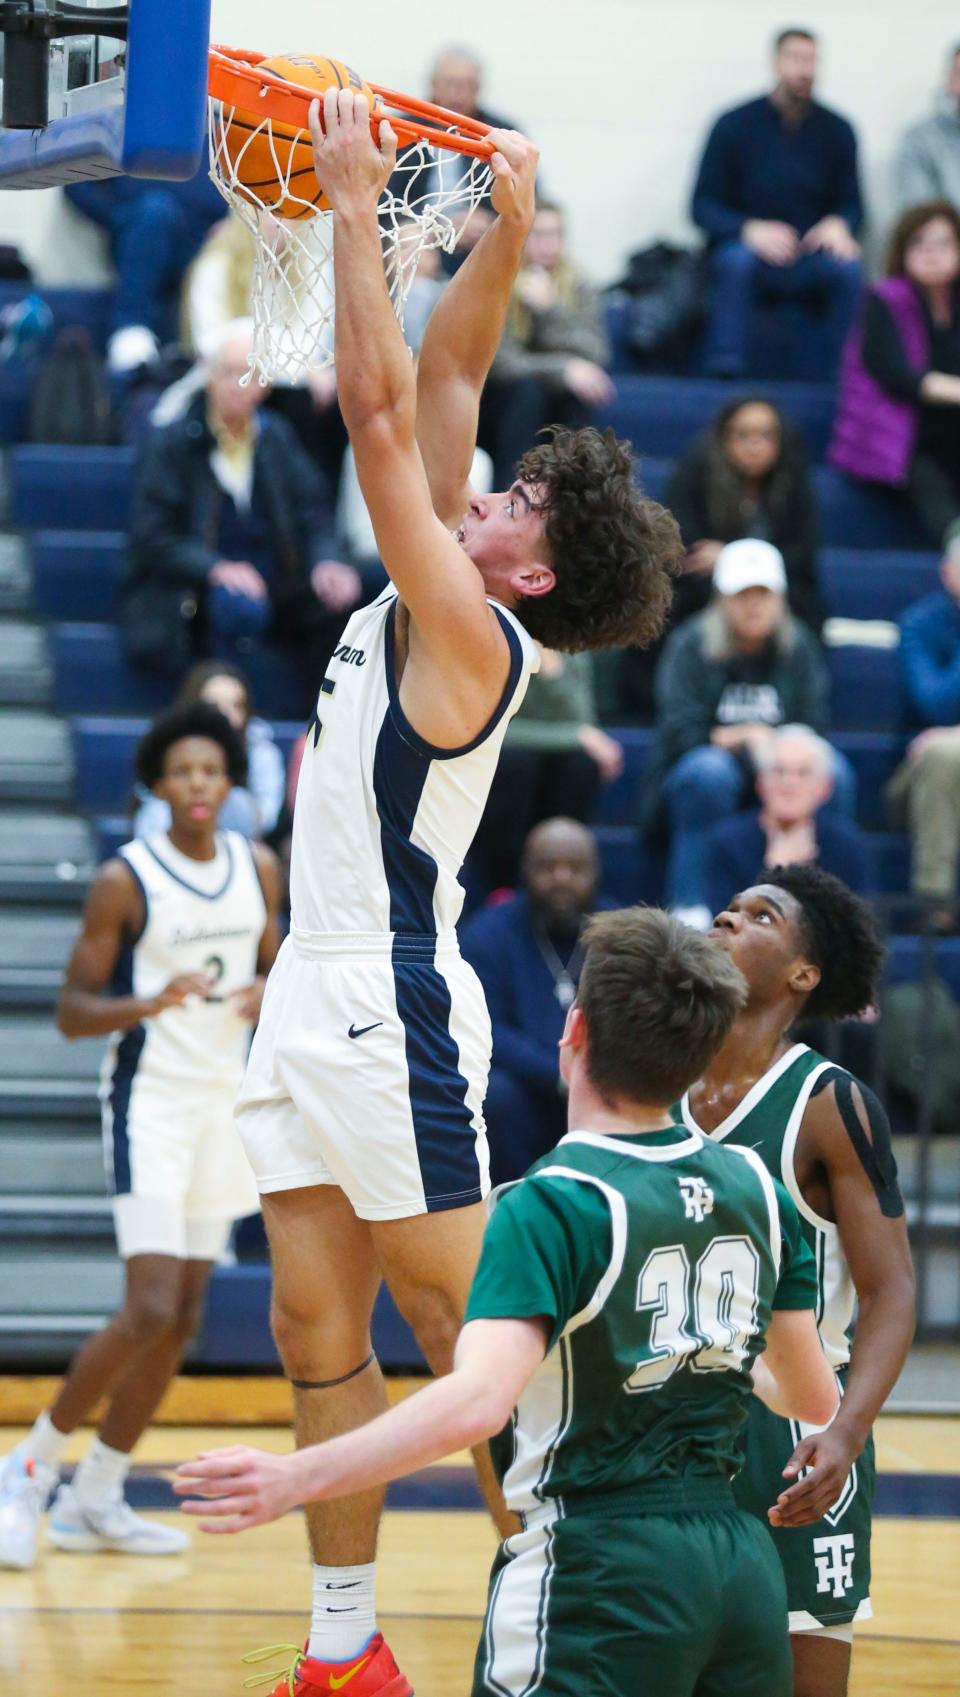 Salesianum's Aidan Montgomery slams in the first half of Salesianum's 65-51 win at home, Thursday, Feb. 2, 2023.